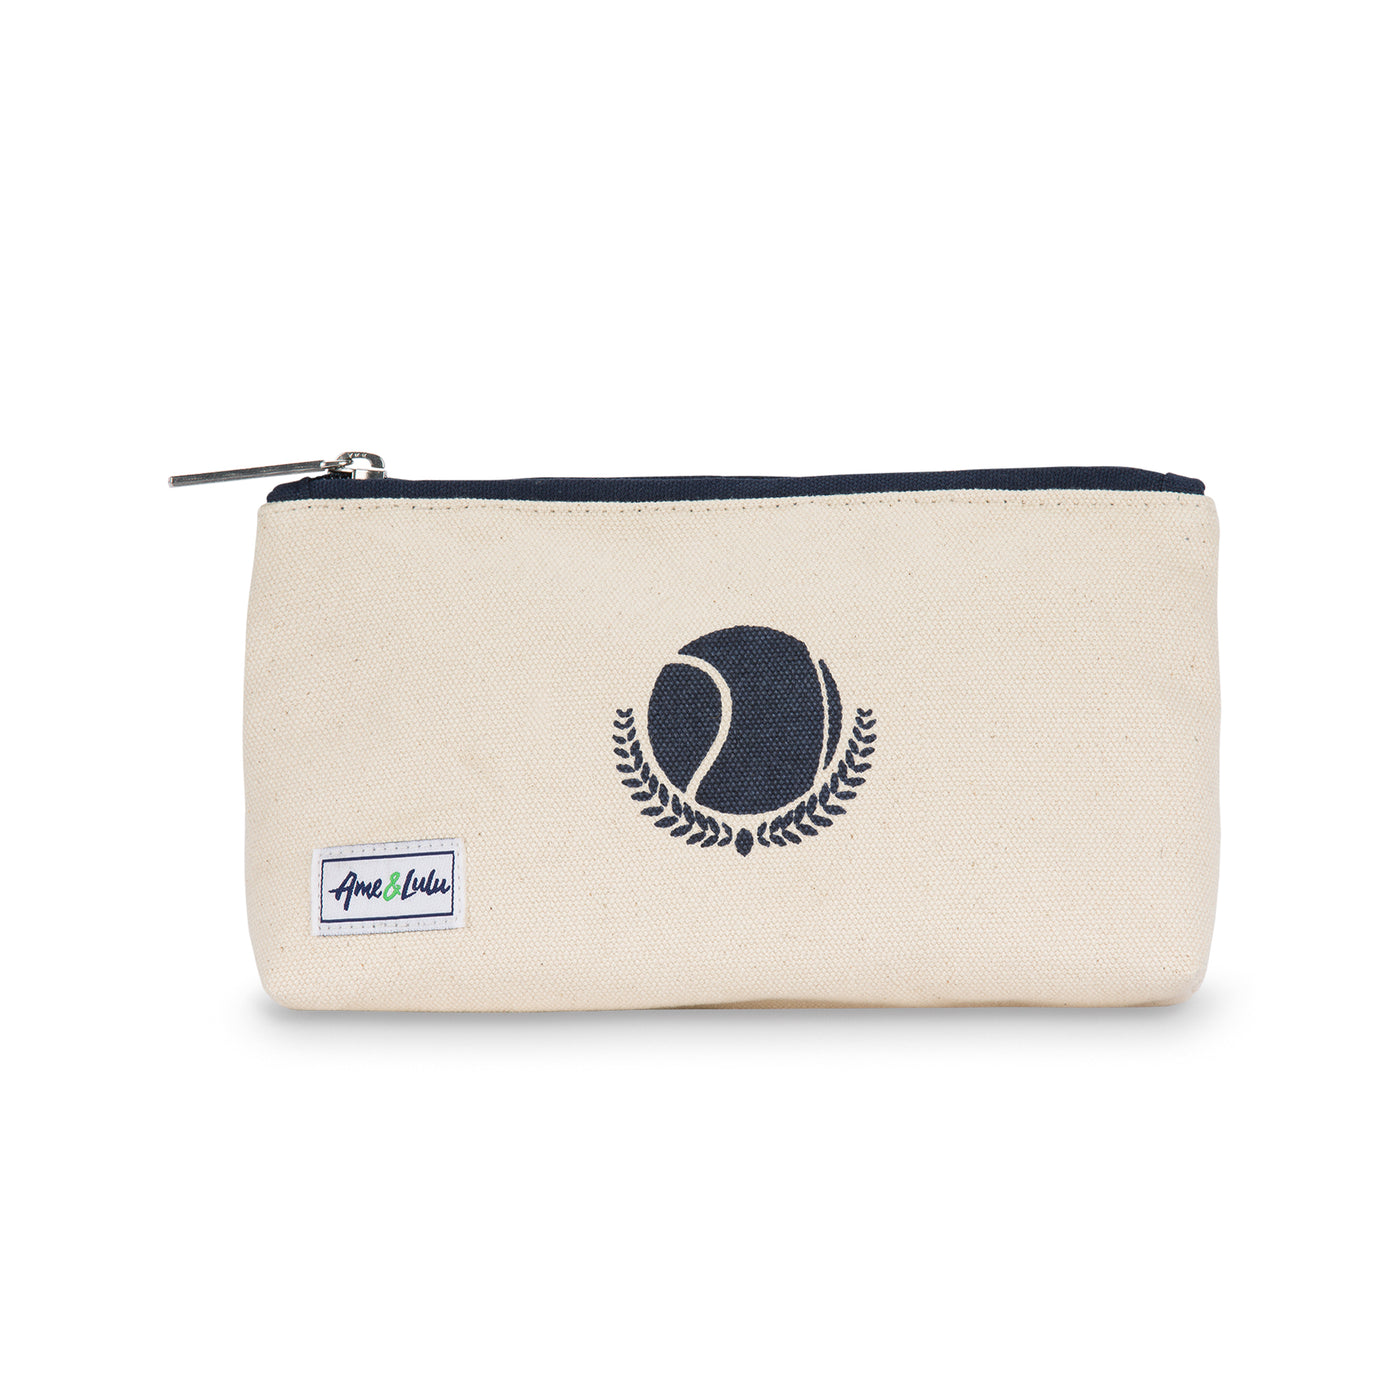 Front view of small canvas makeup pouch with navy zipper. Front has a navy tennis ball and laurel leaves printed.